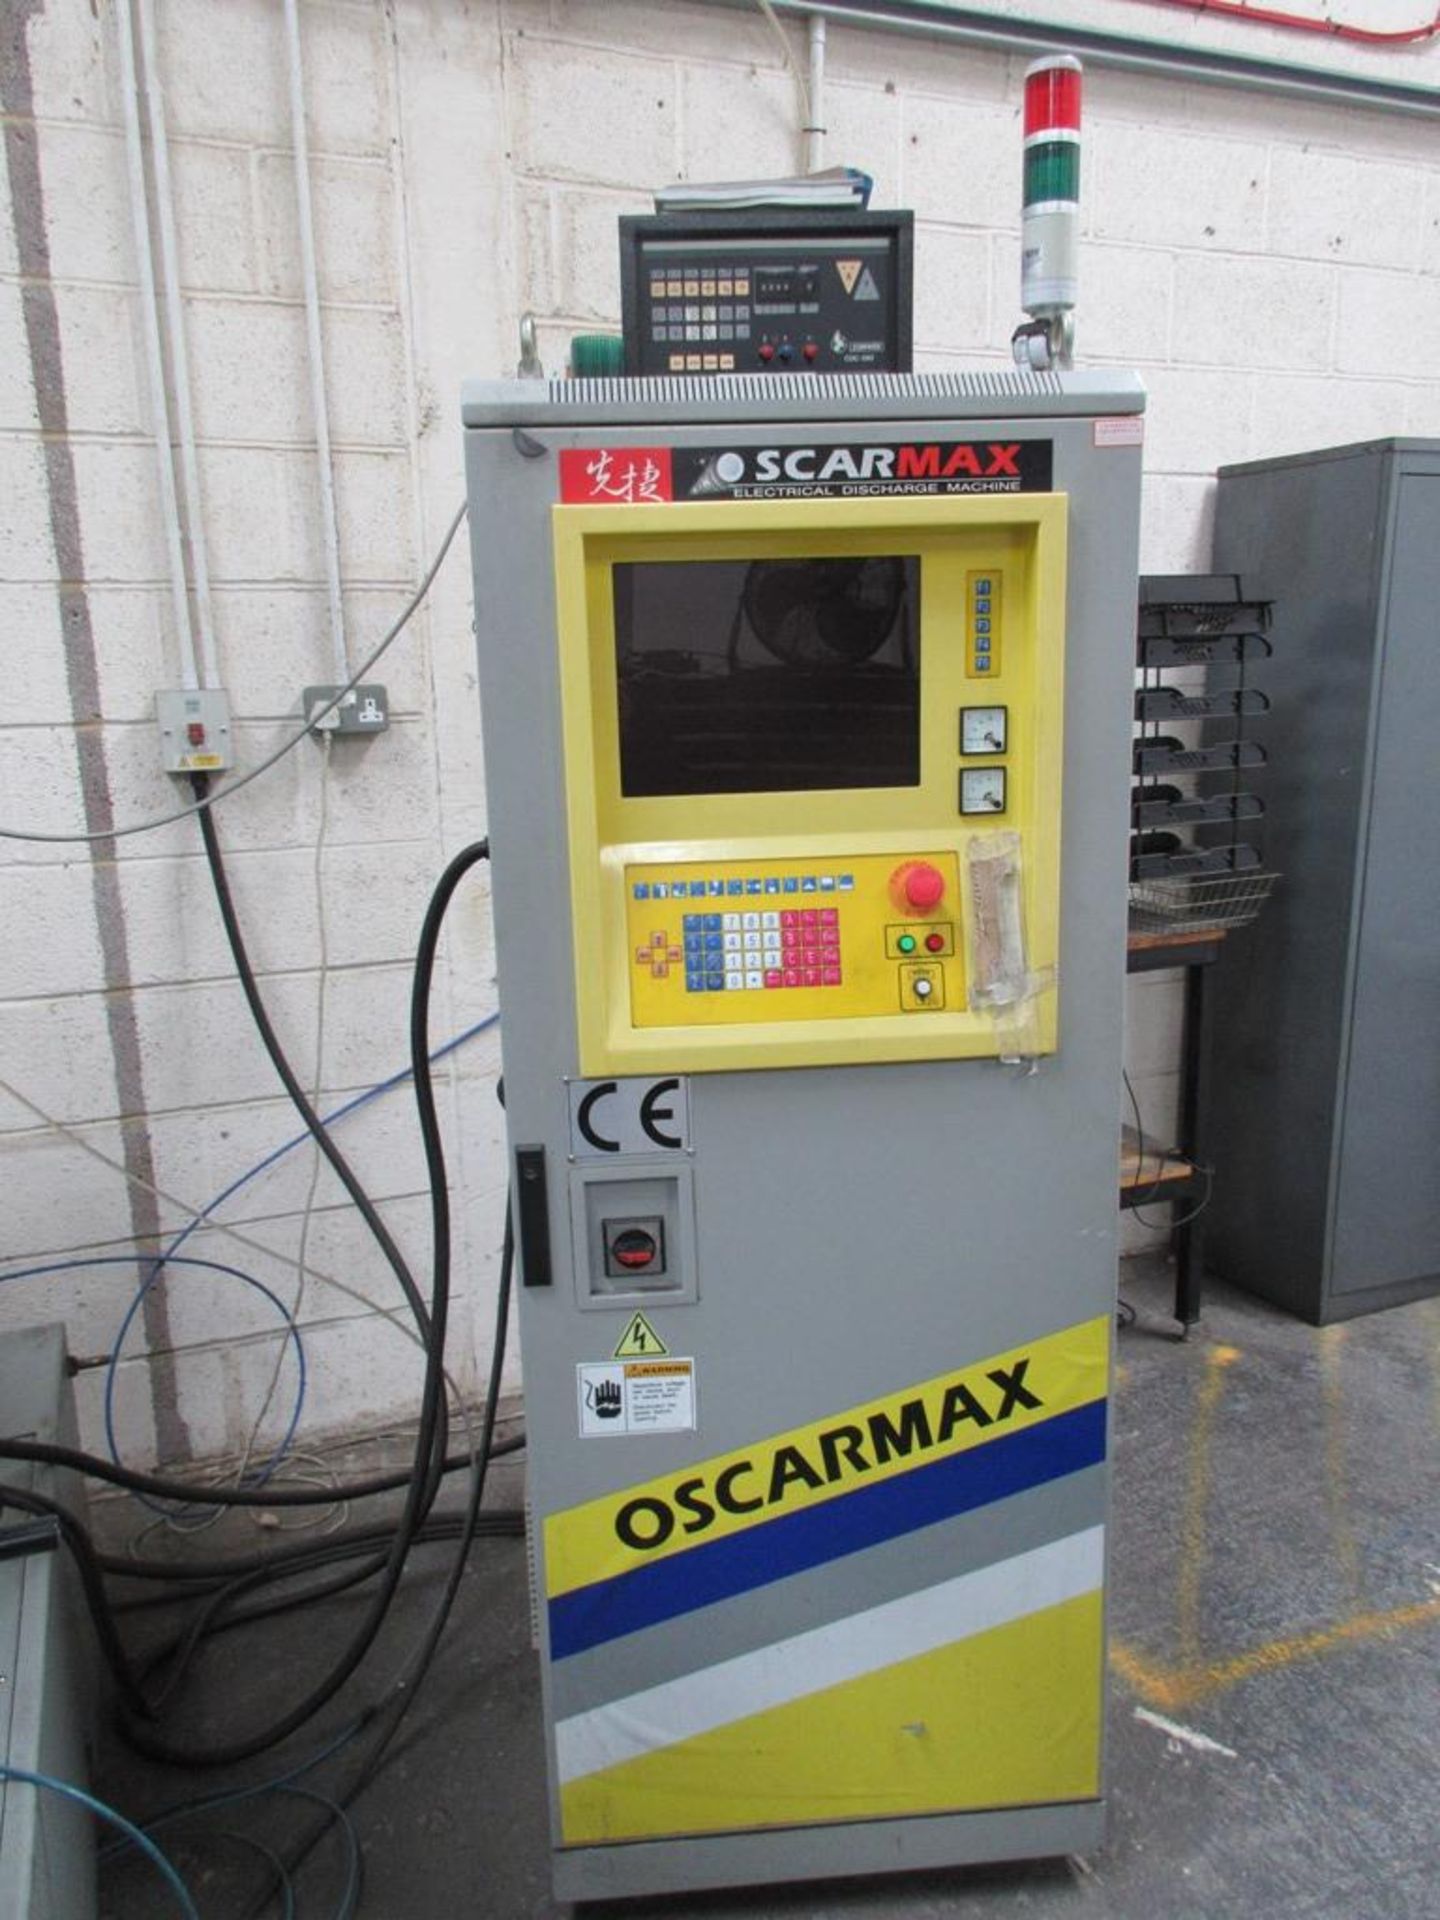 Oscarmax S430S ZNC 60A Electrical discharge machine (2016) - Image 7 of 10